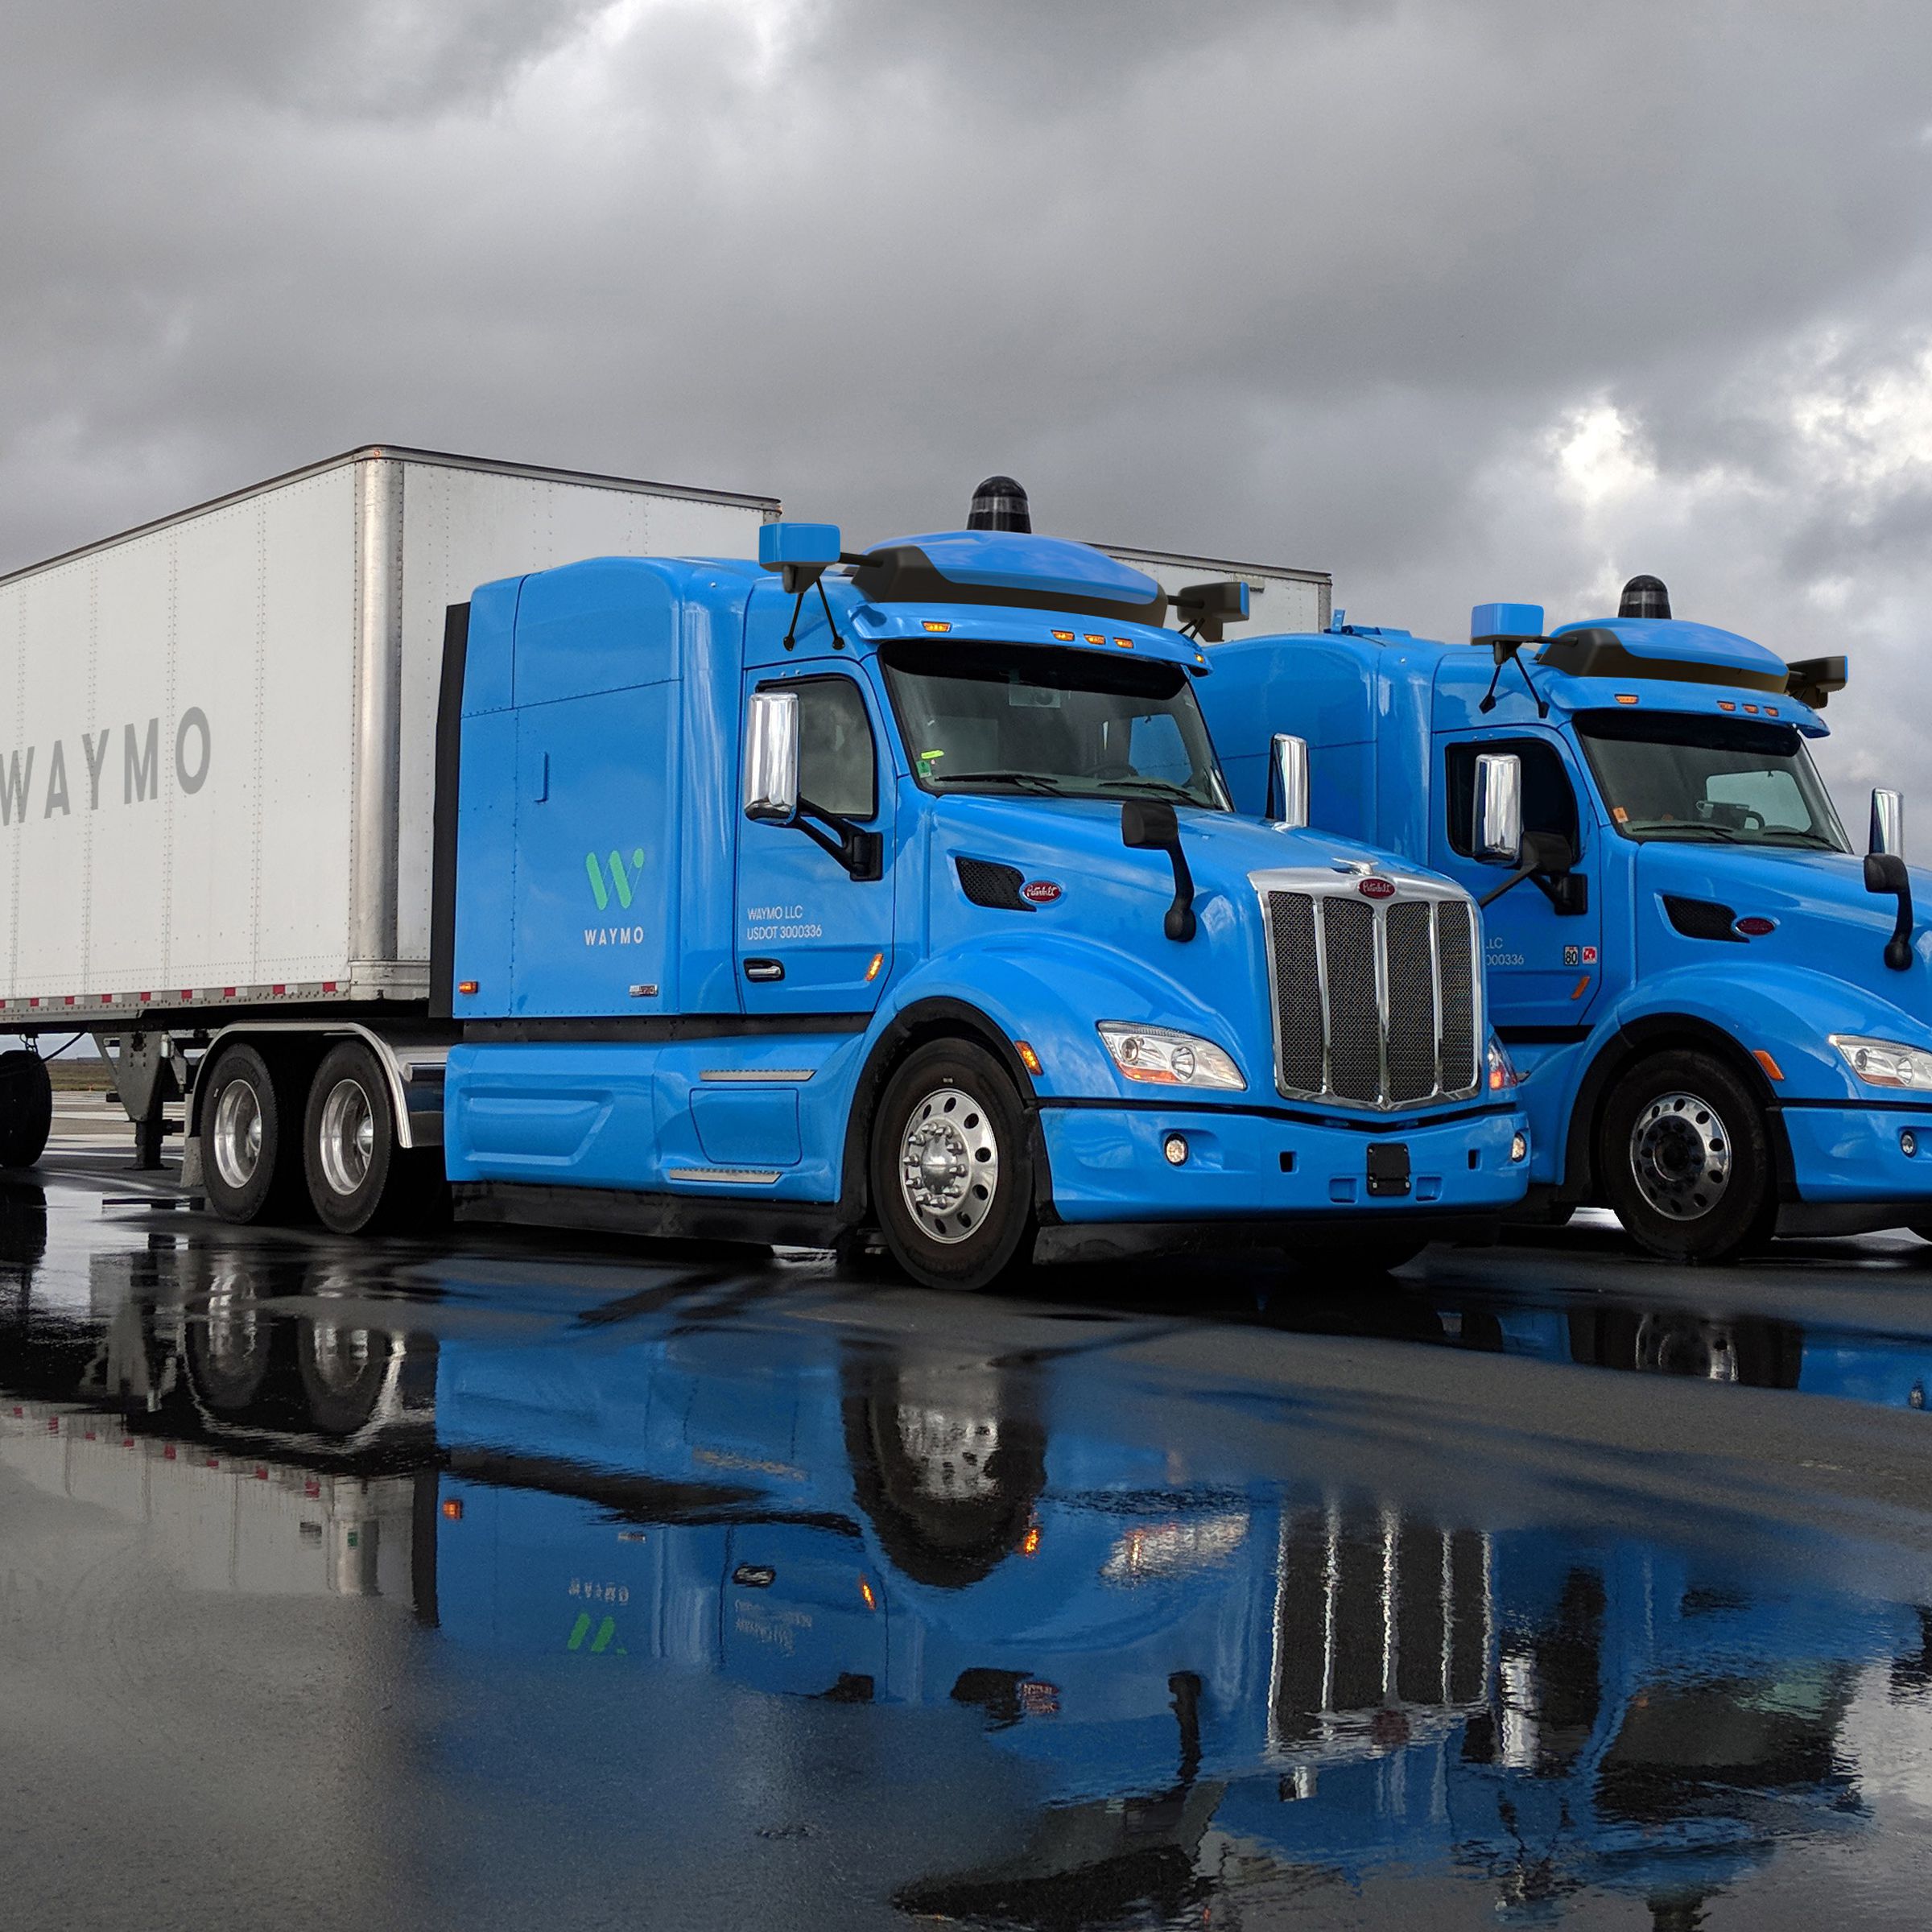 Two blue Waymo autonomous trucks next to one another on a cloudy, rainy day.